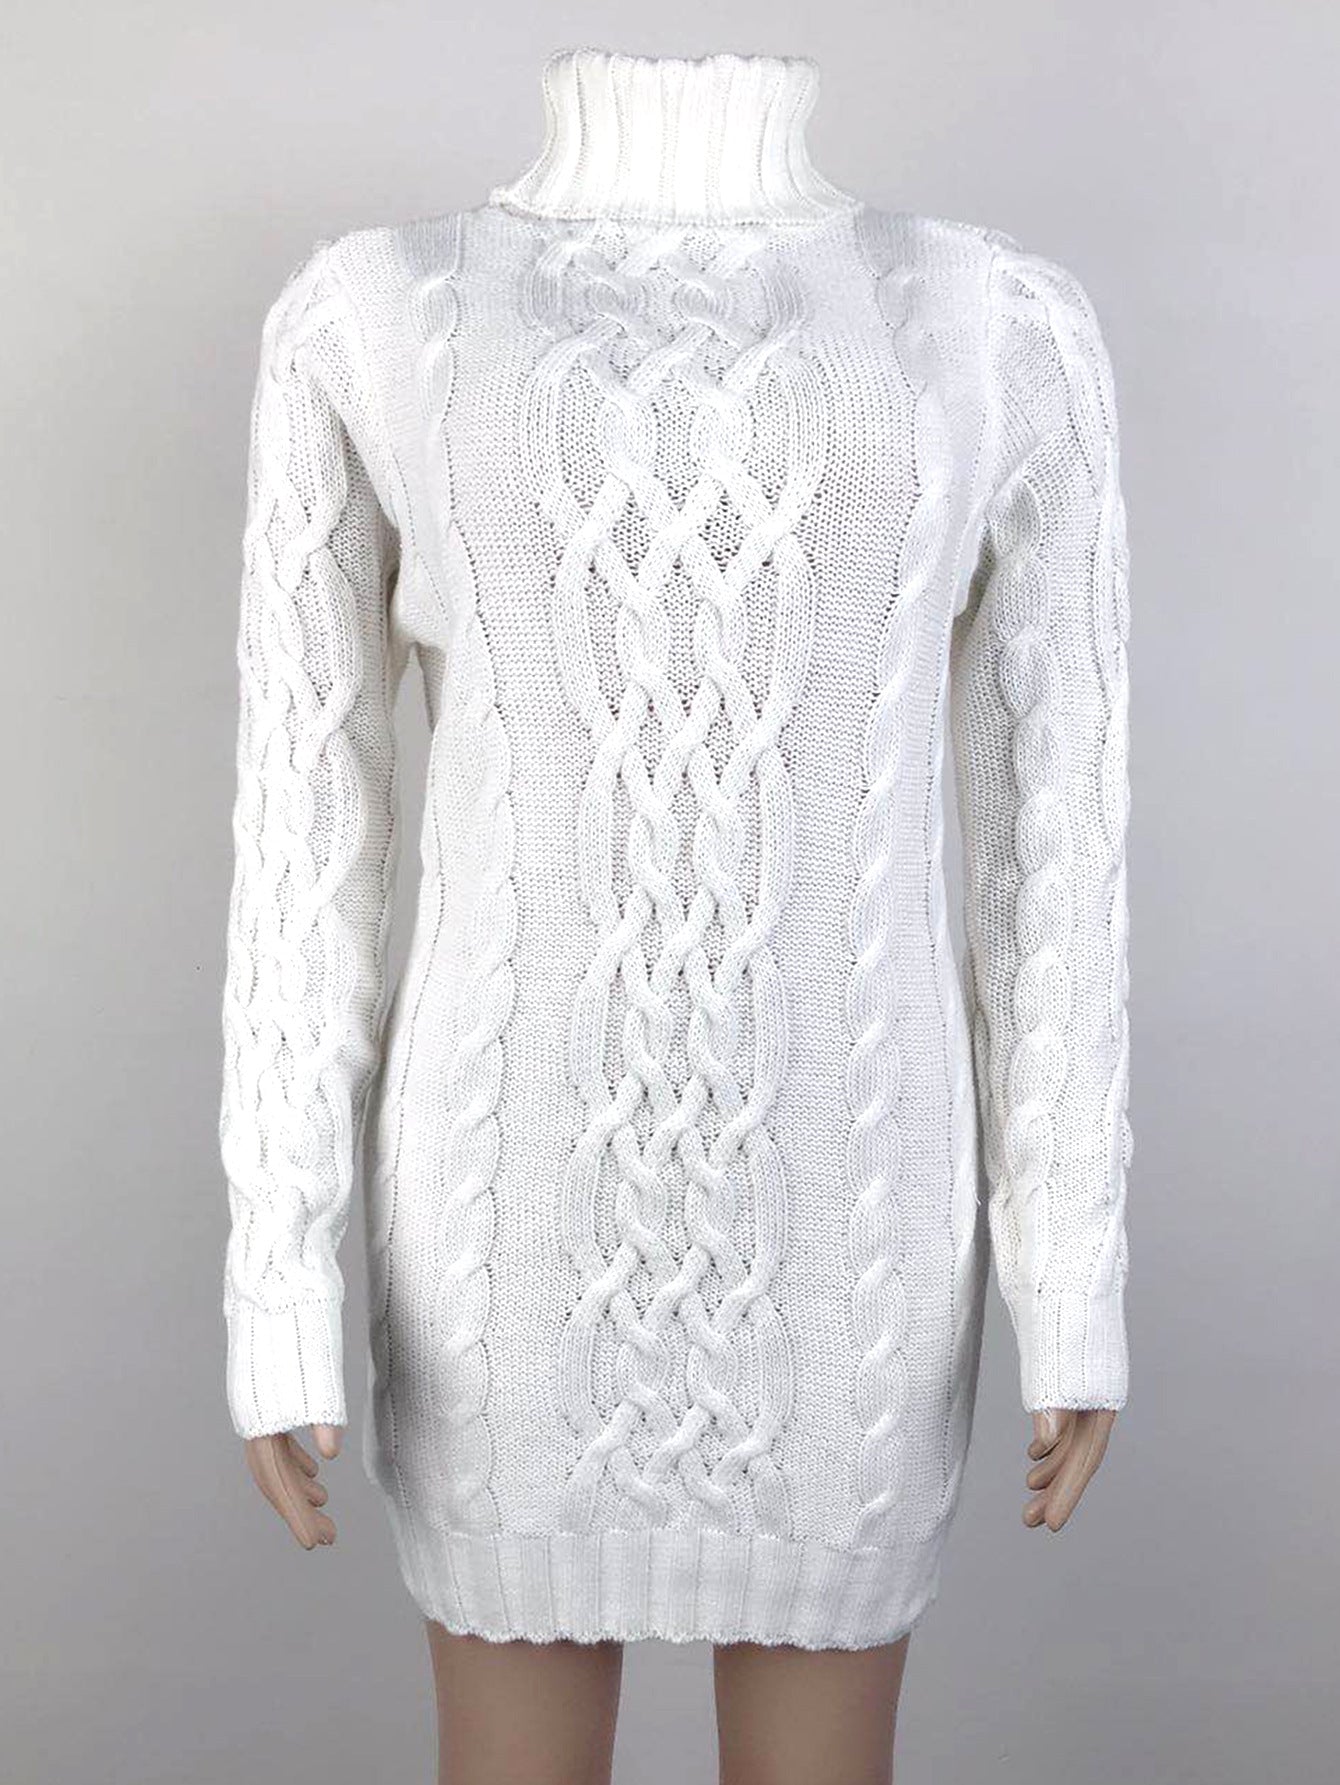 Vintage Turtleneck Knitted Pullover Sweaters